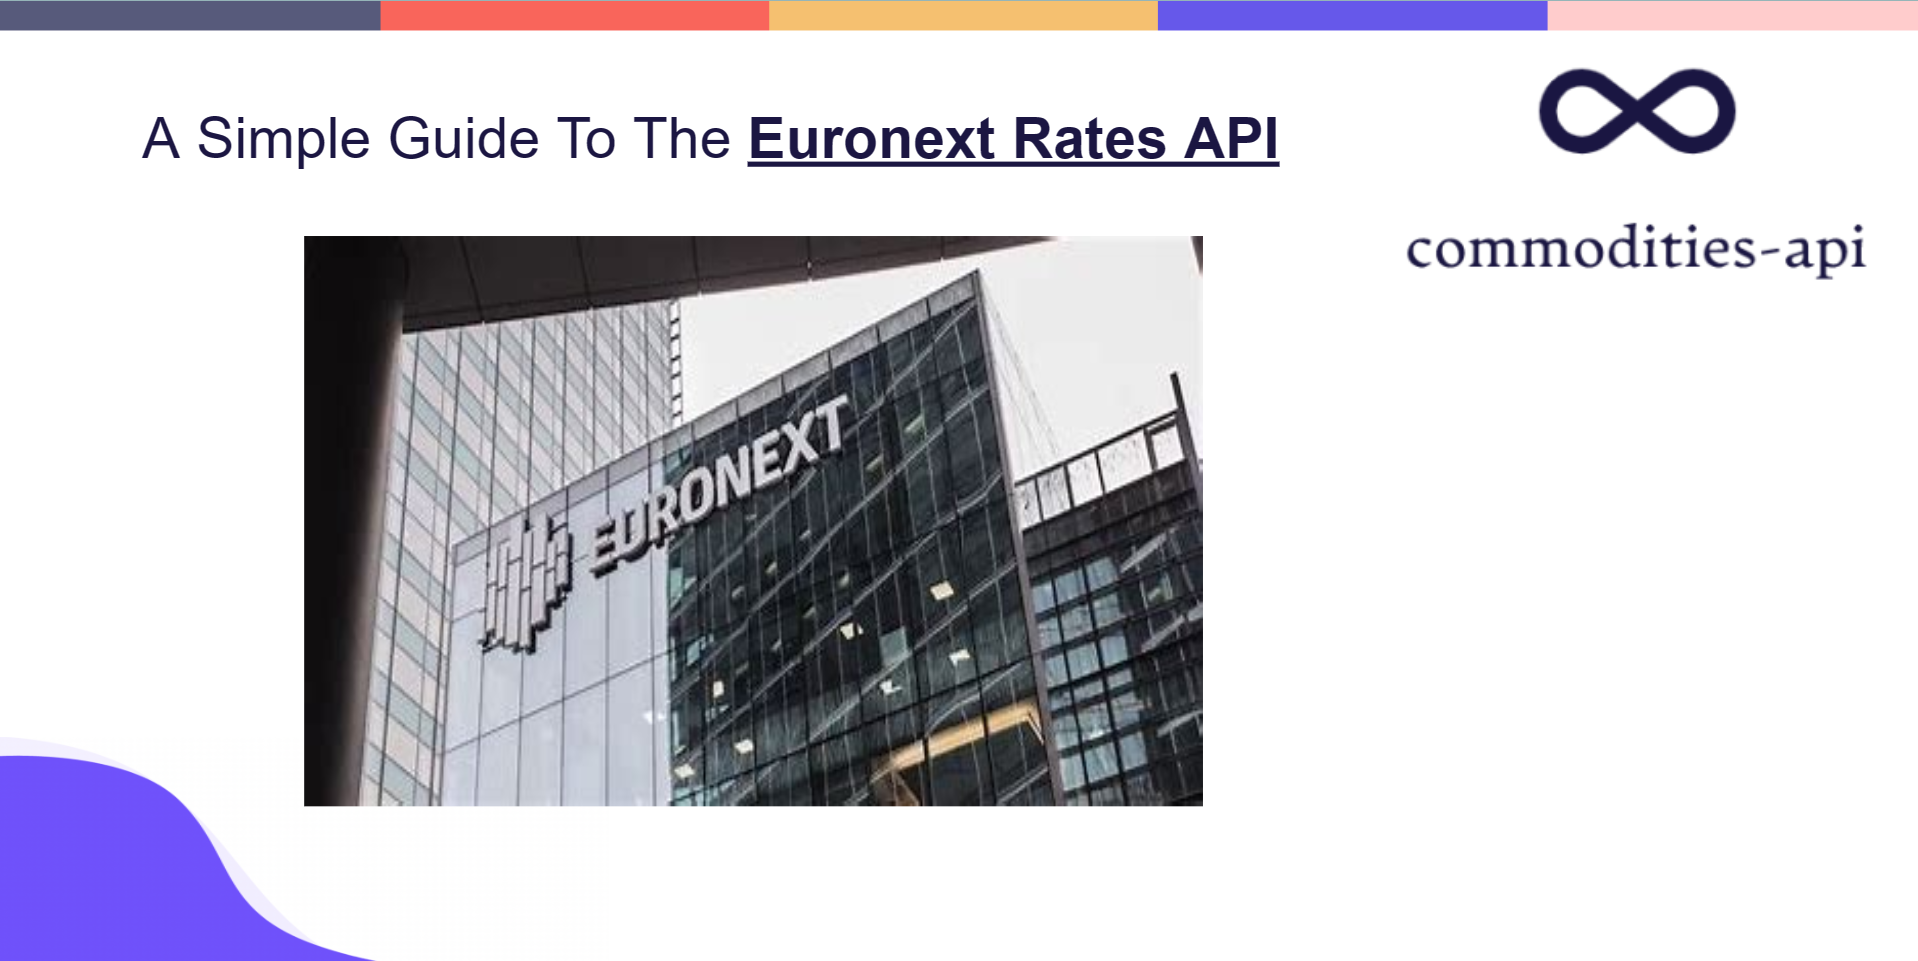 A Simple Guide To The Euronext Rates API